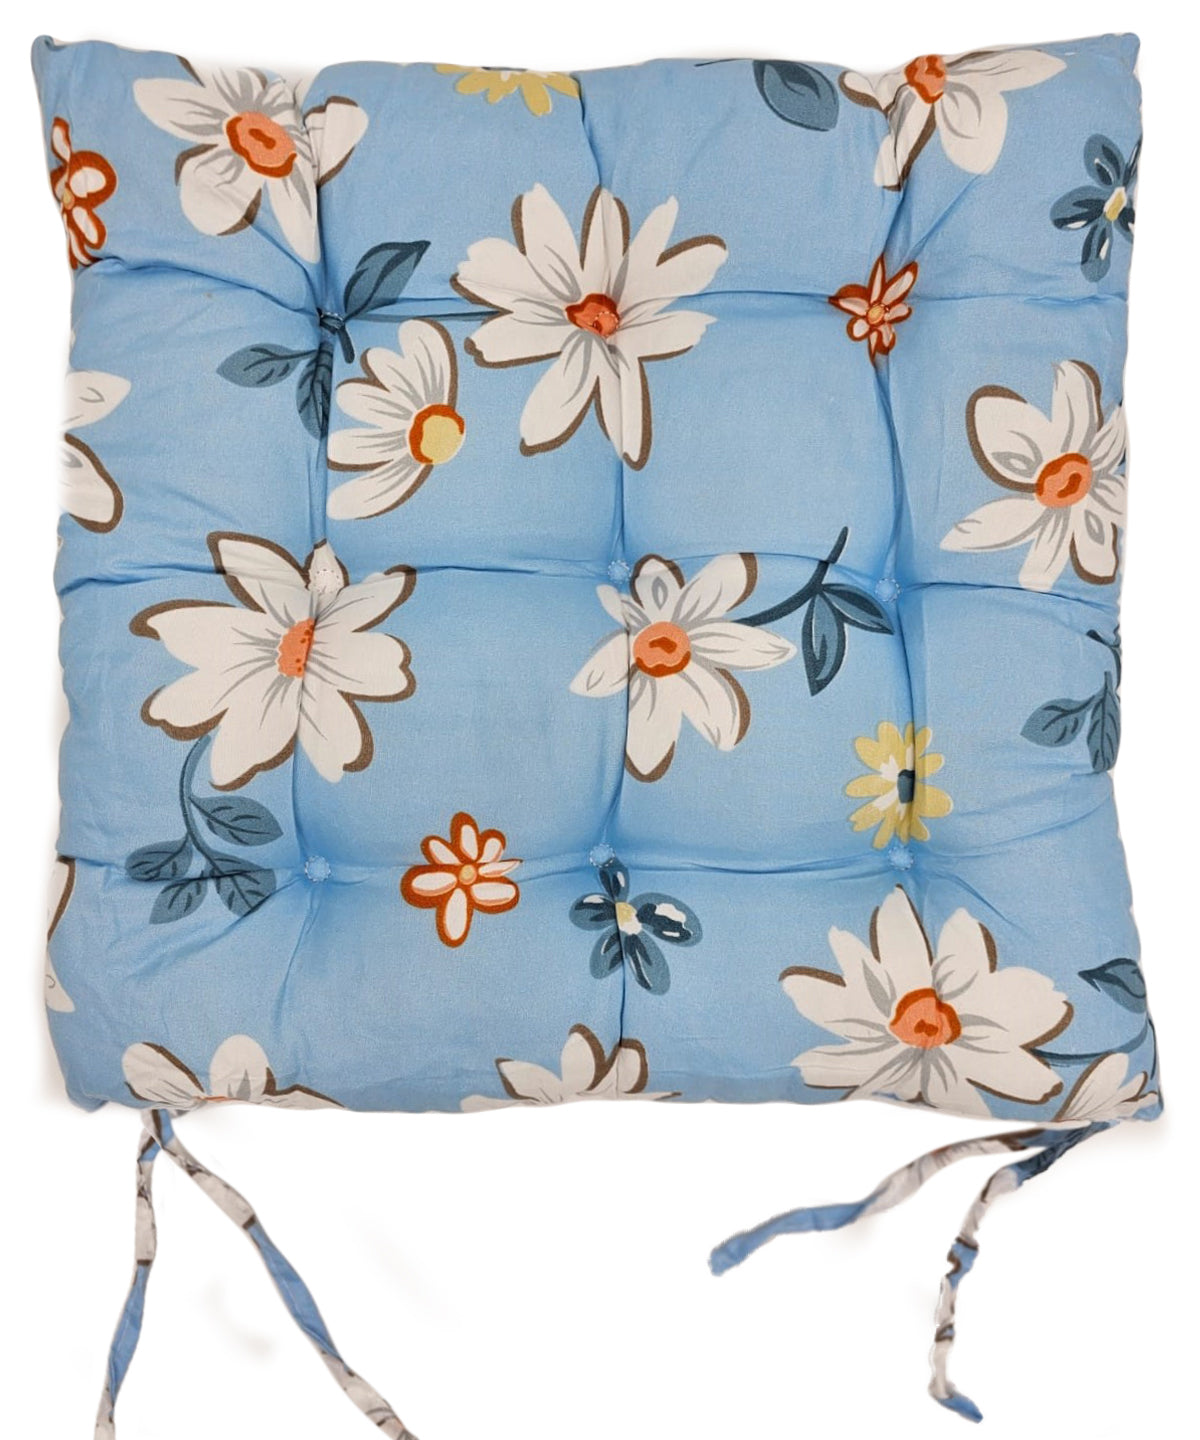 Seat Pad Dining Garden Kitchen Chair Cushions Tie On Daisy Floral Blue